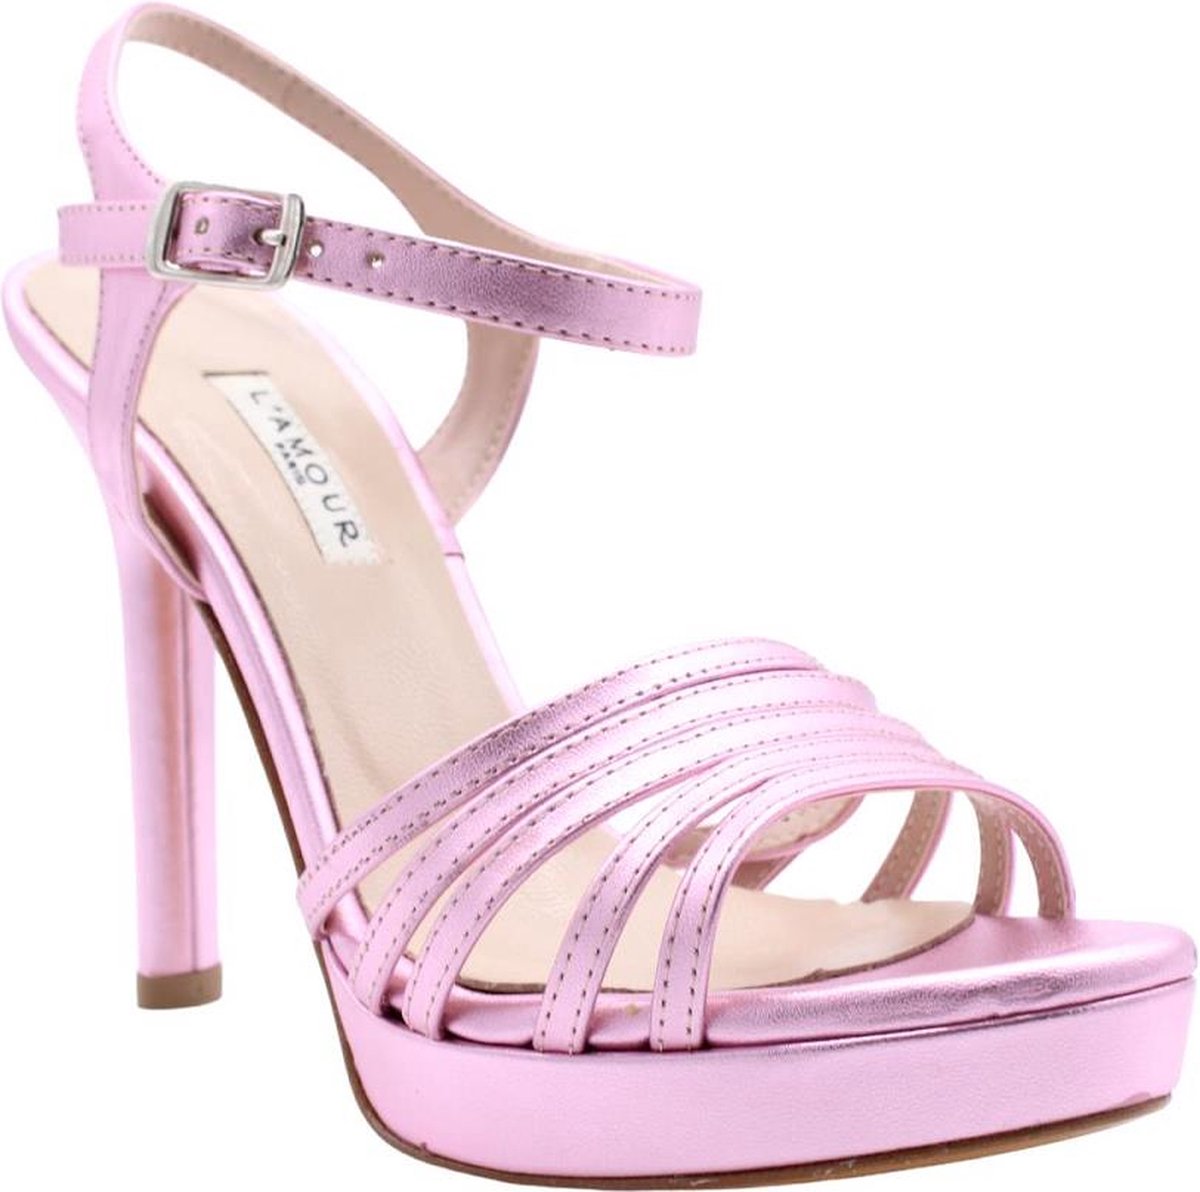 L'amour Sandaal Pink 38